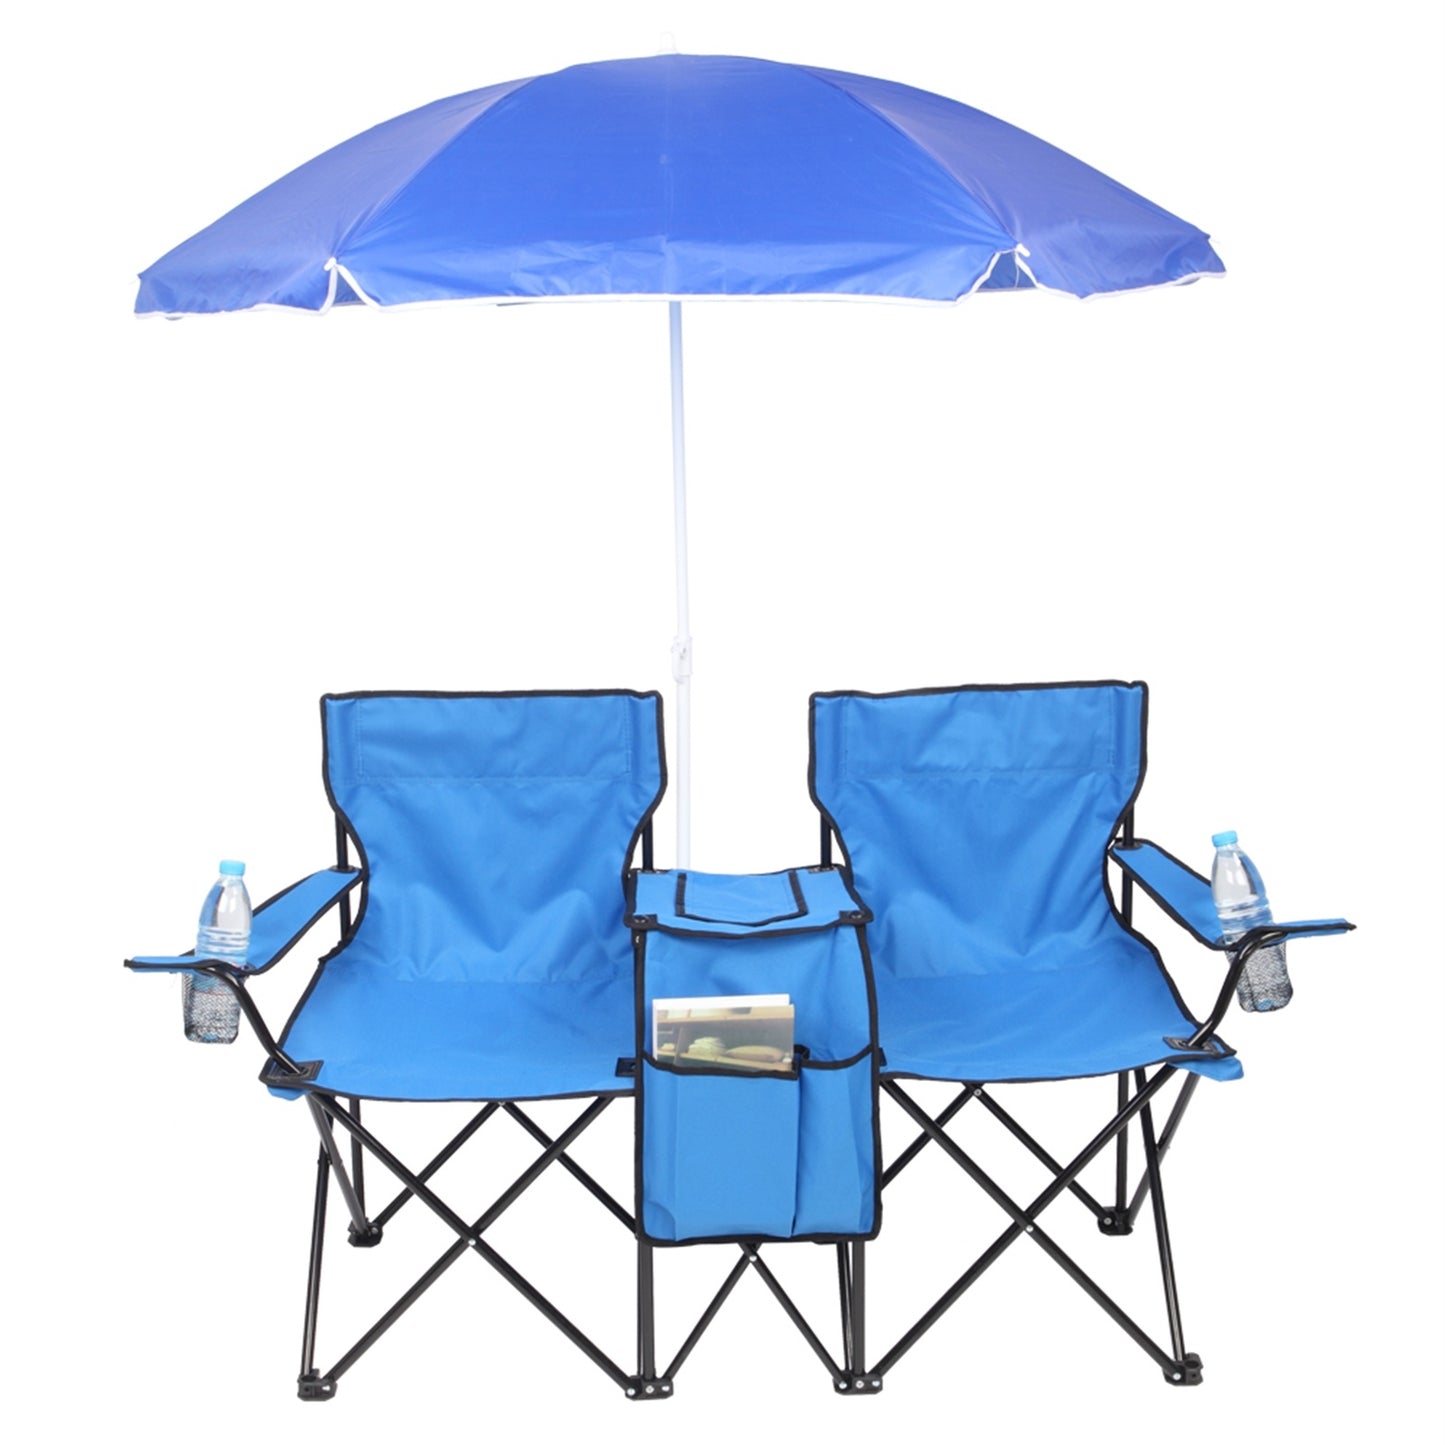 Double Folding Picnic Chairs w/Umbrella Mini Table Beverage Holder & Carrying Bag